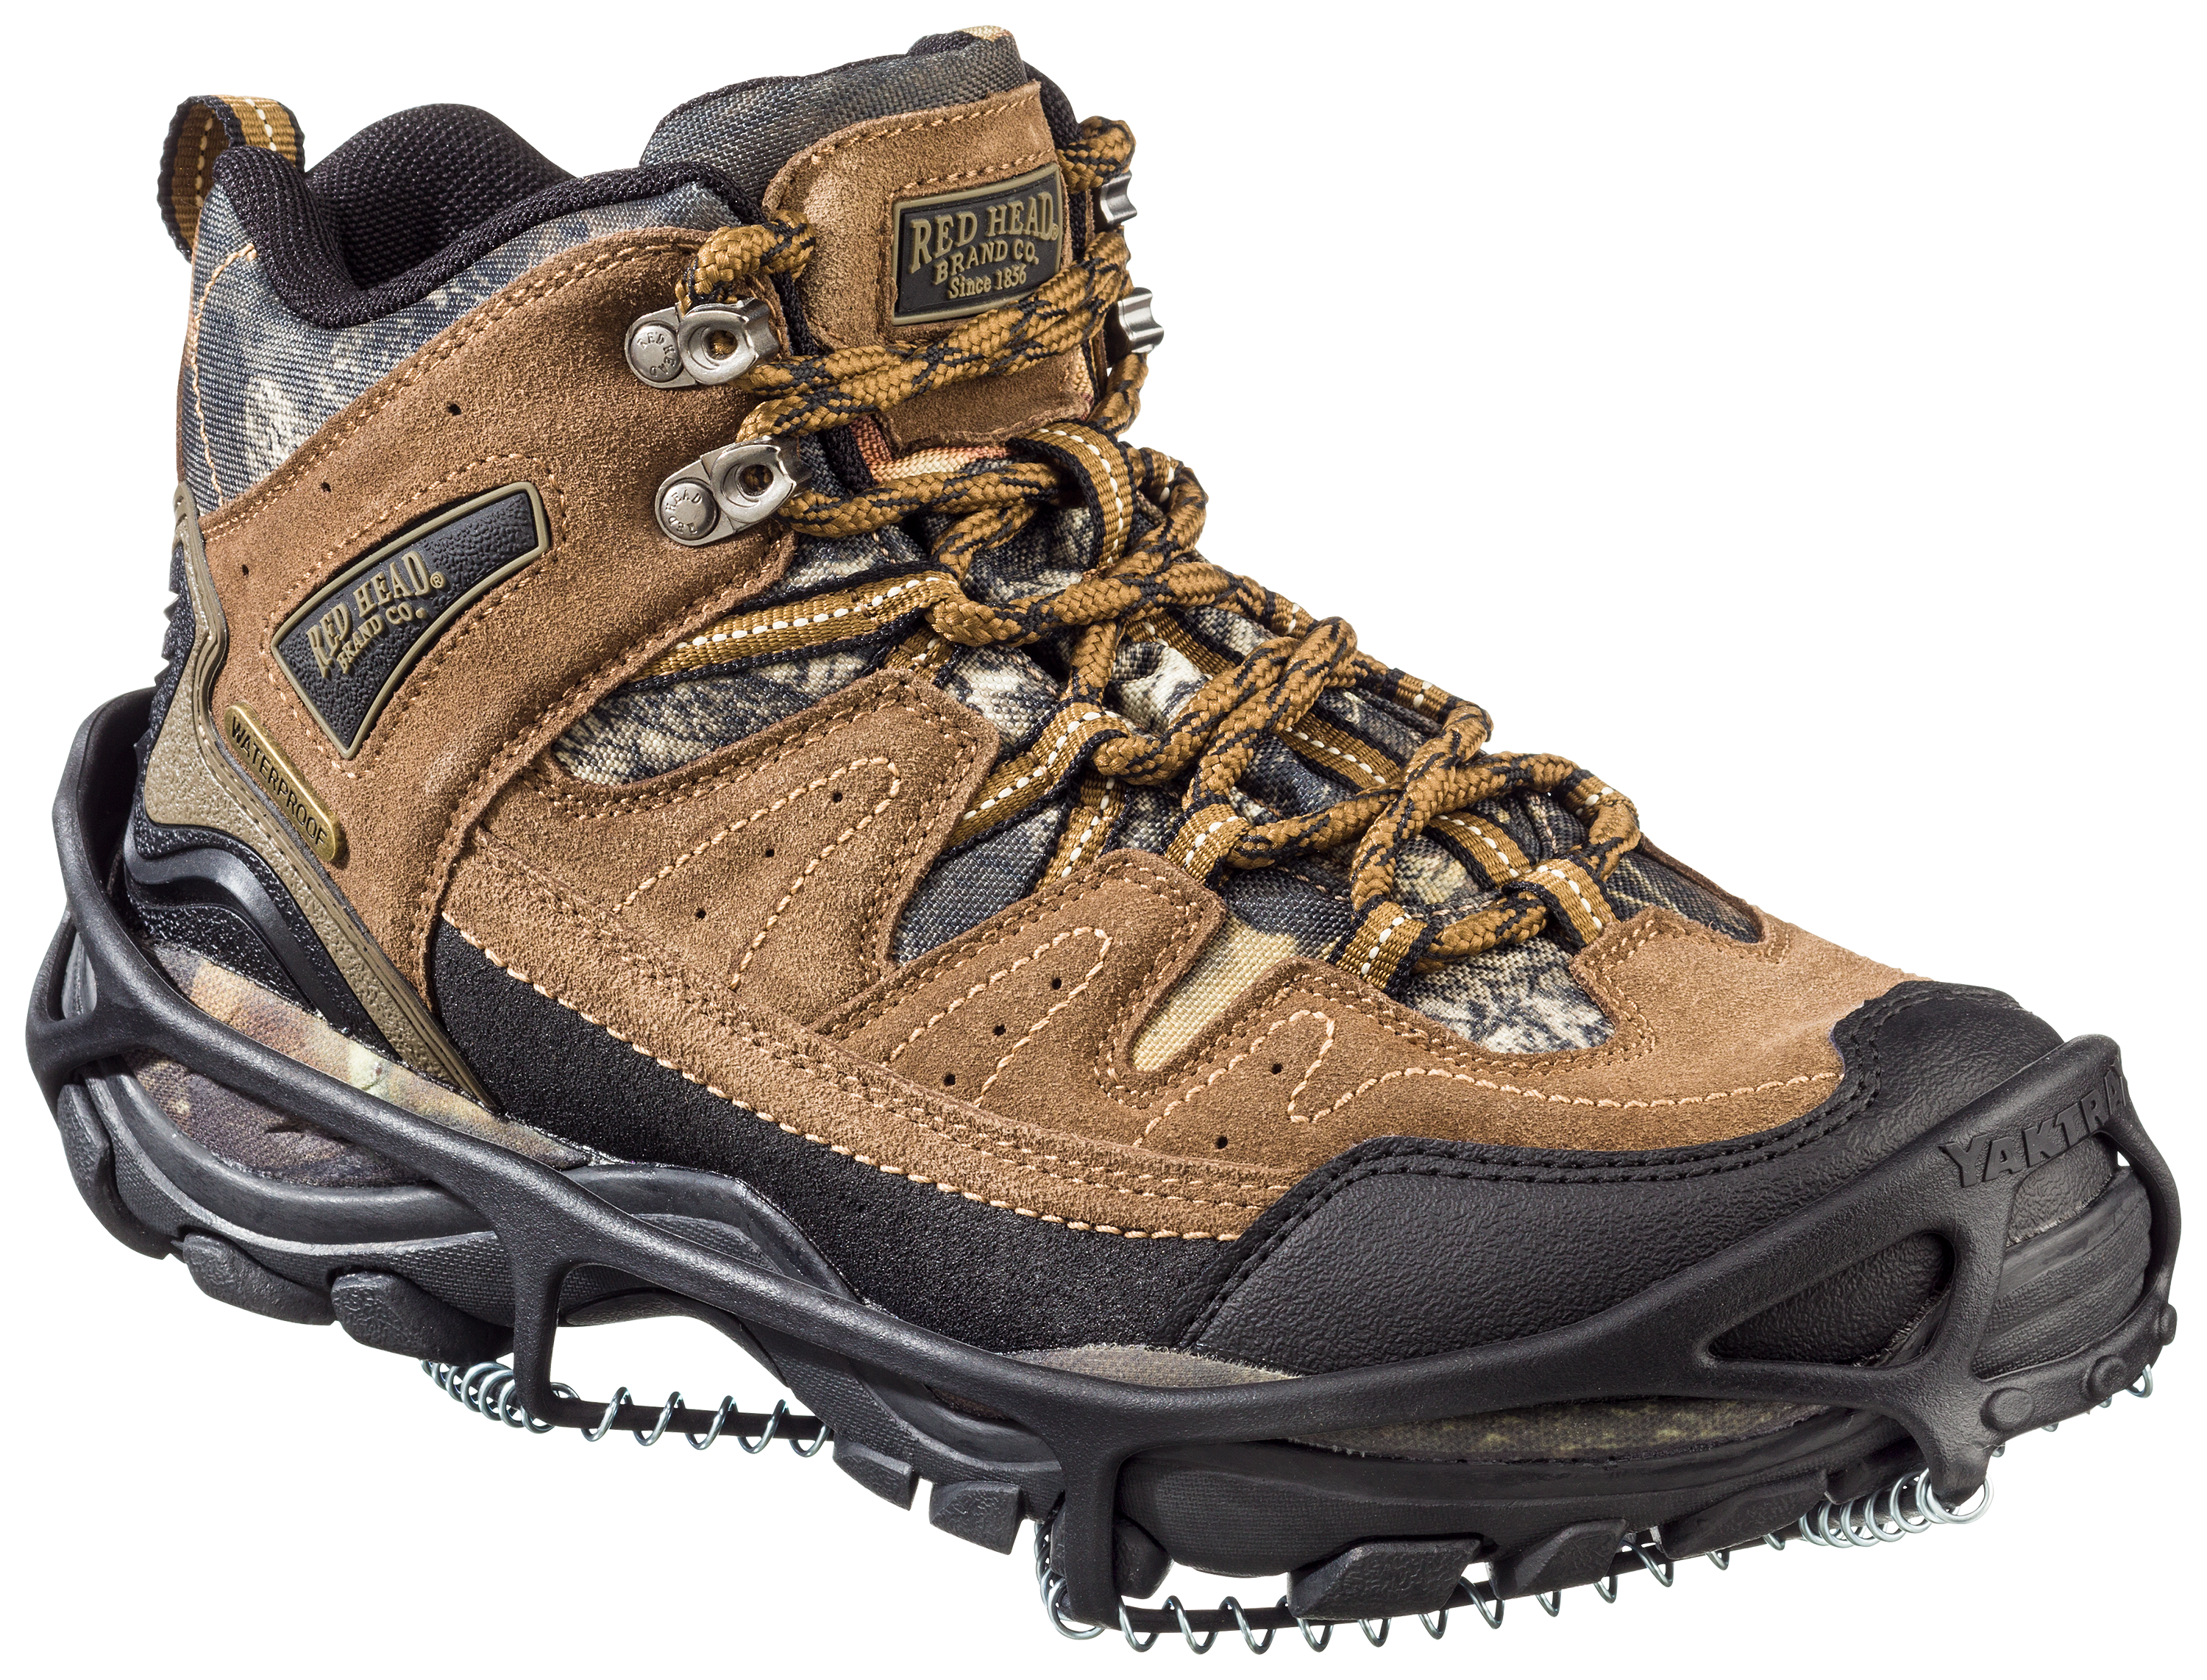 Yaktrax Walk Traction Cleats for Snow and Ice